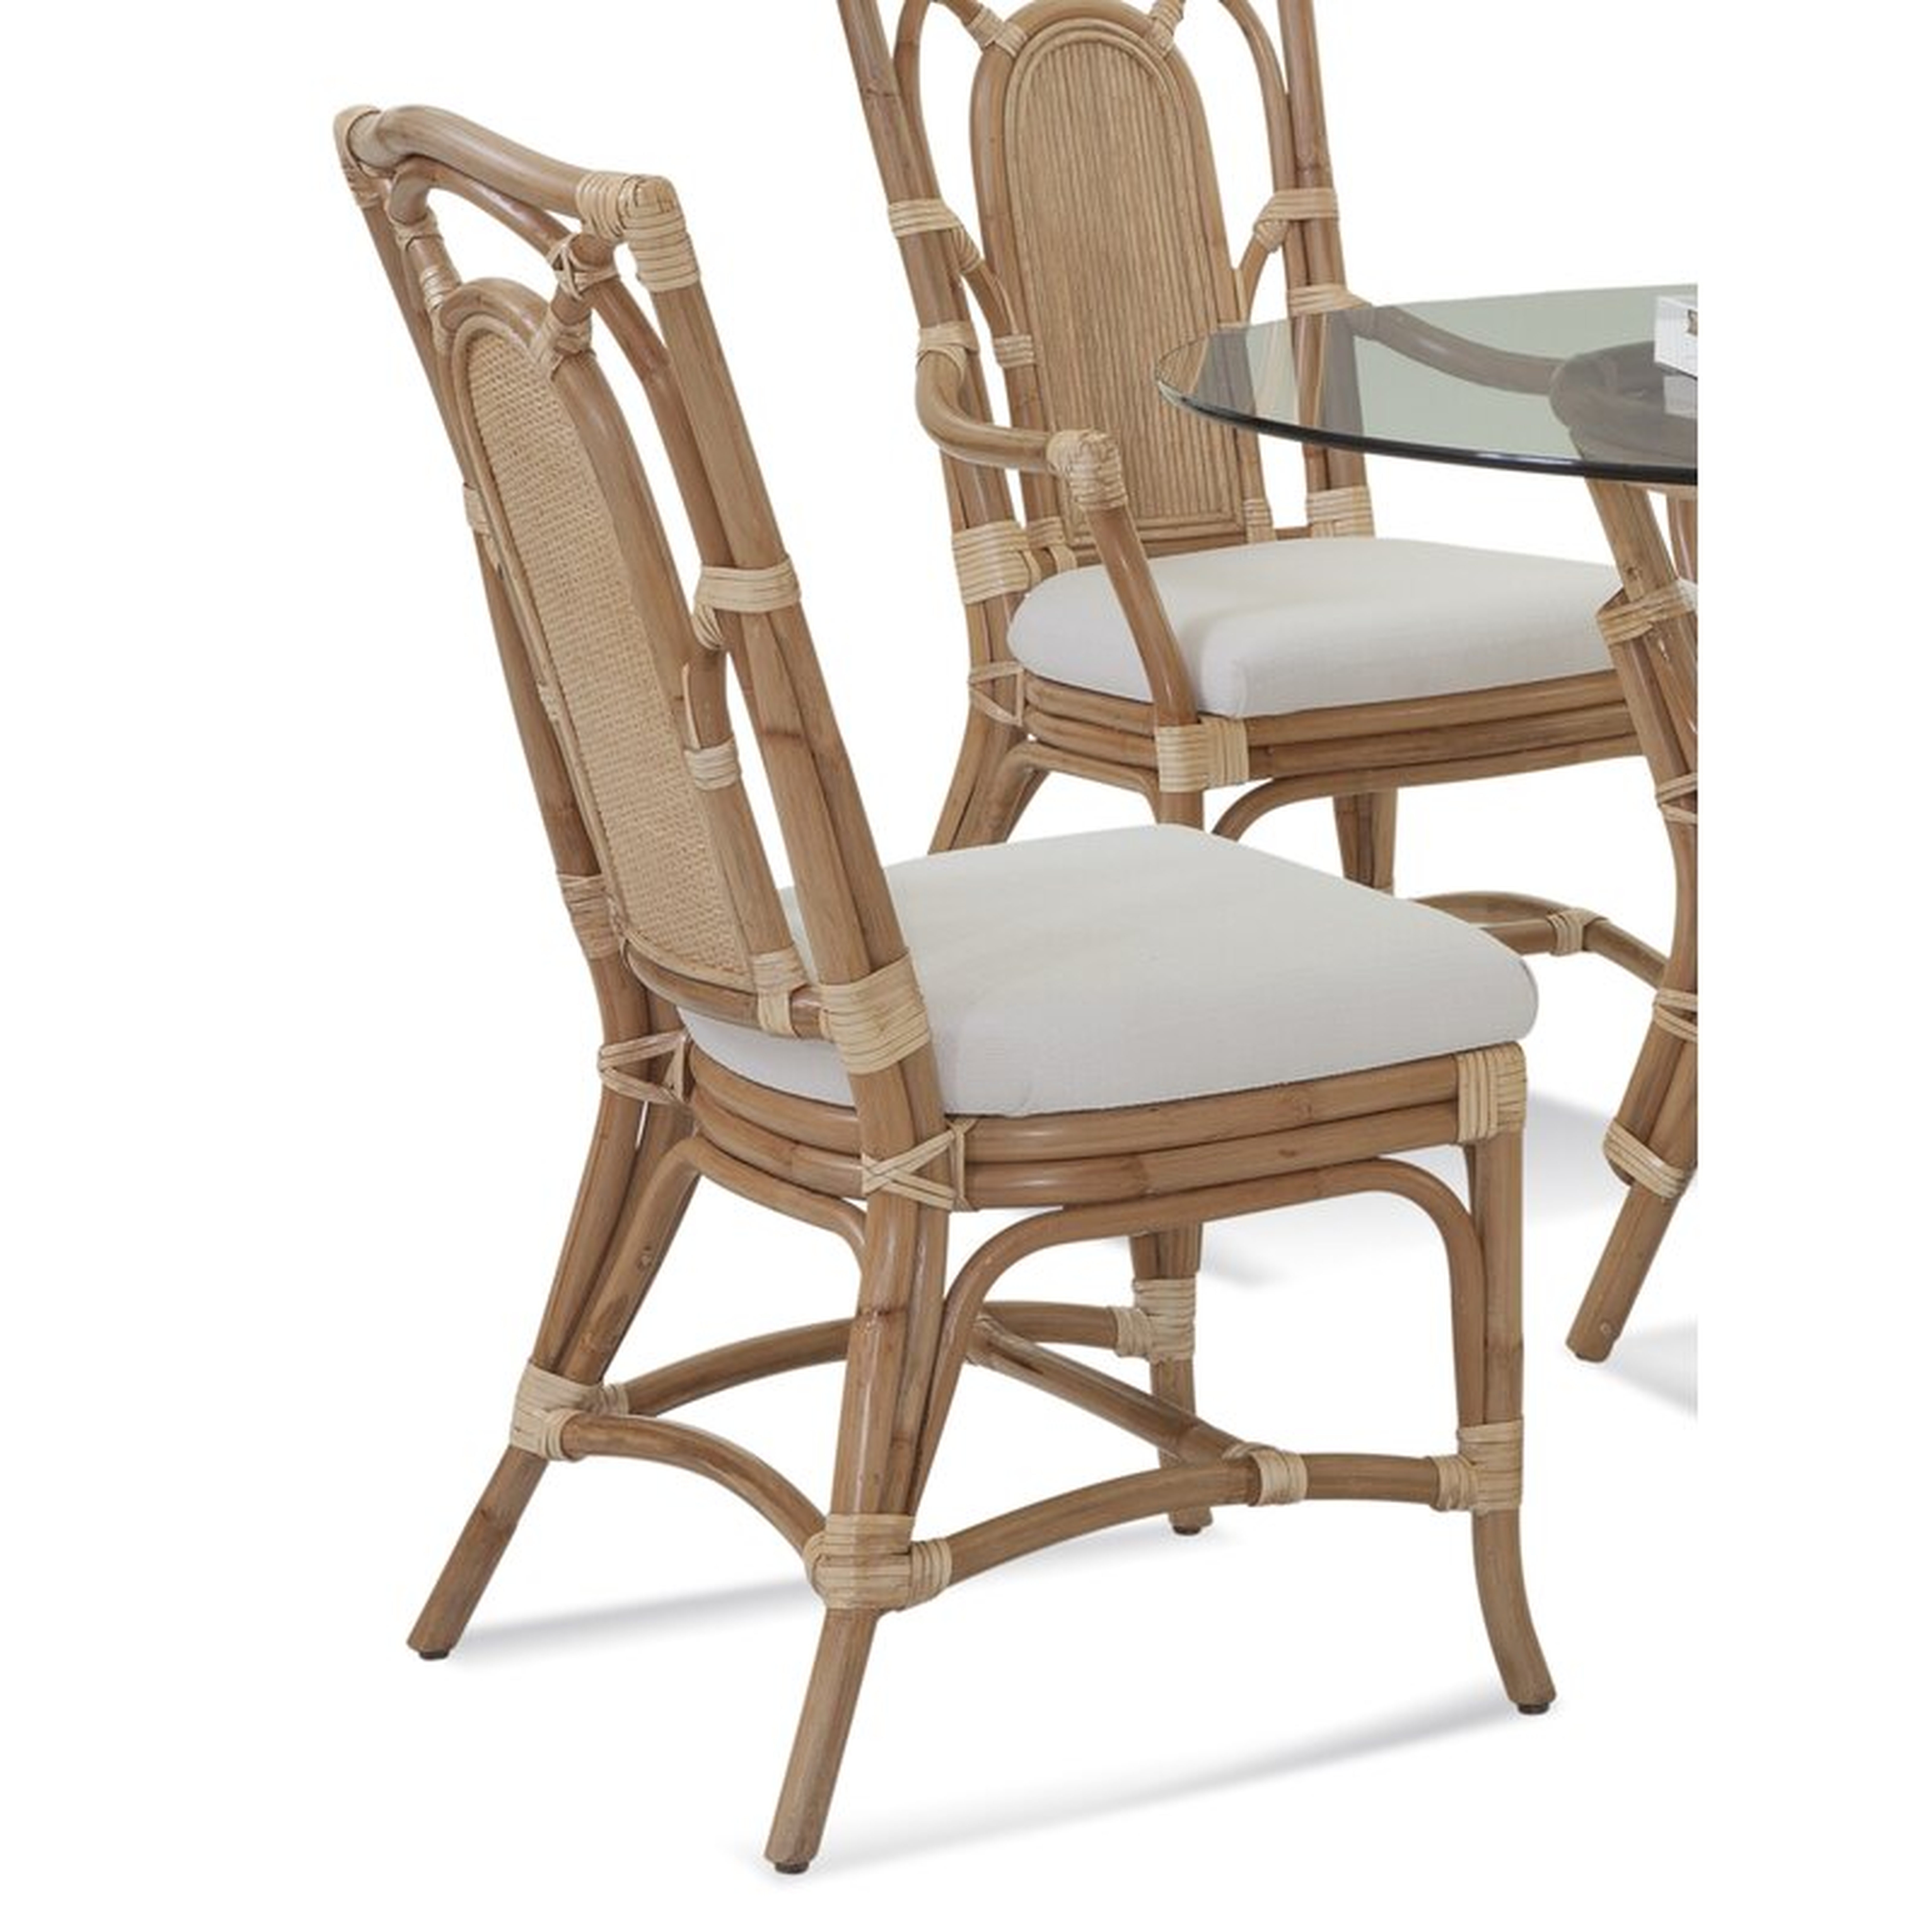 Braxton Culler Bay Walk Upholstered Dining Chair (Set of 2) Upholstery Color: Beige, Frame Color: Natural - Perigold